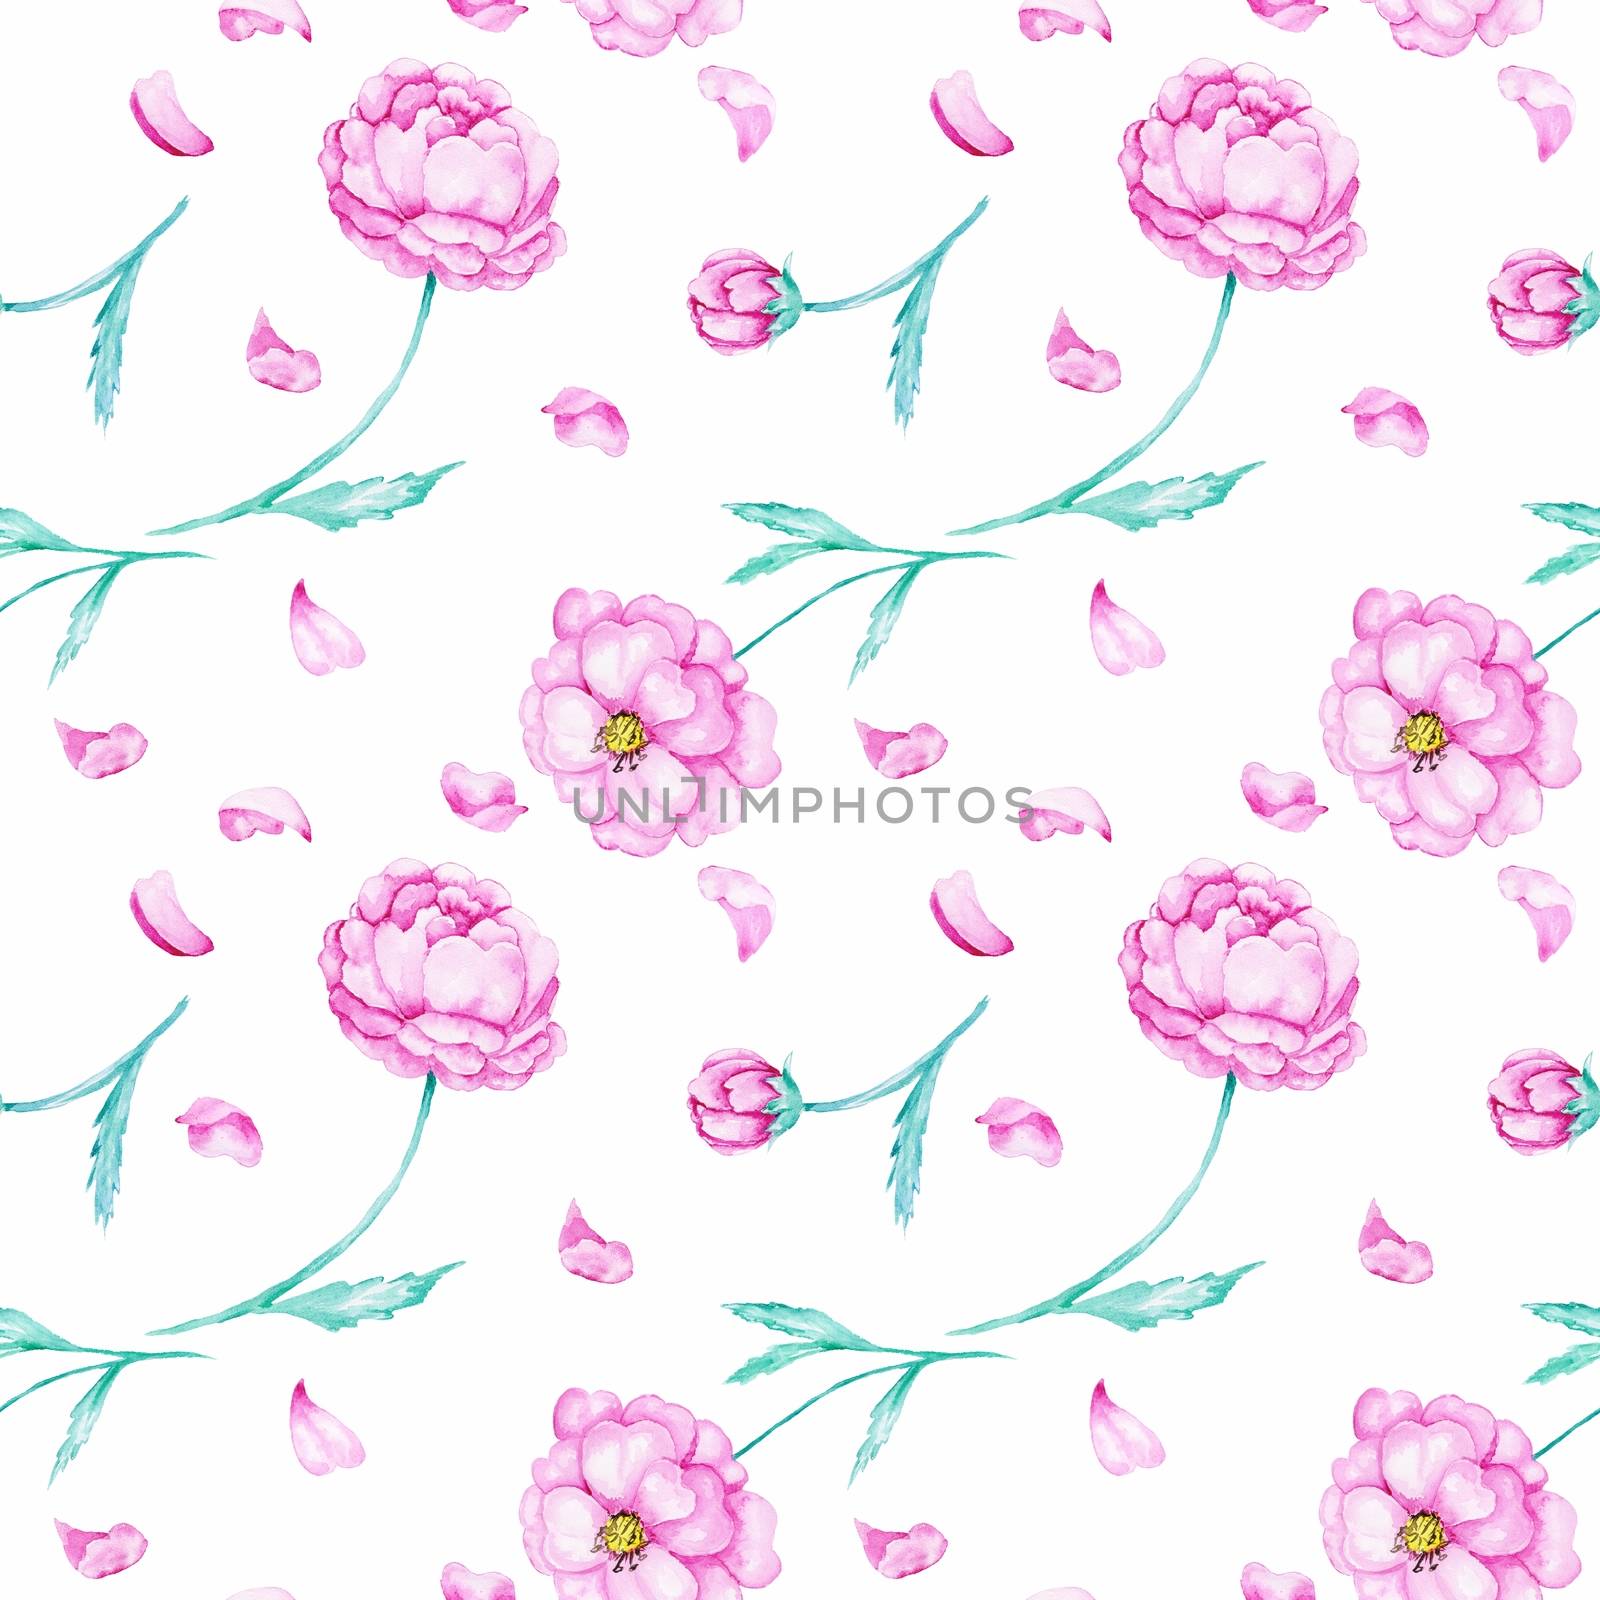 Pattern with hand-painted peony flowers for romantic design